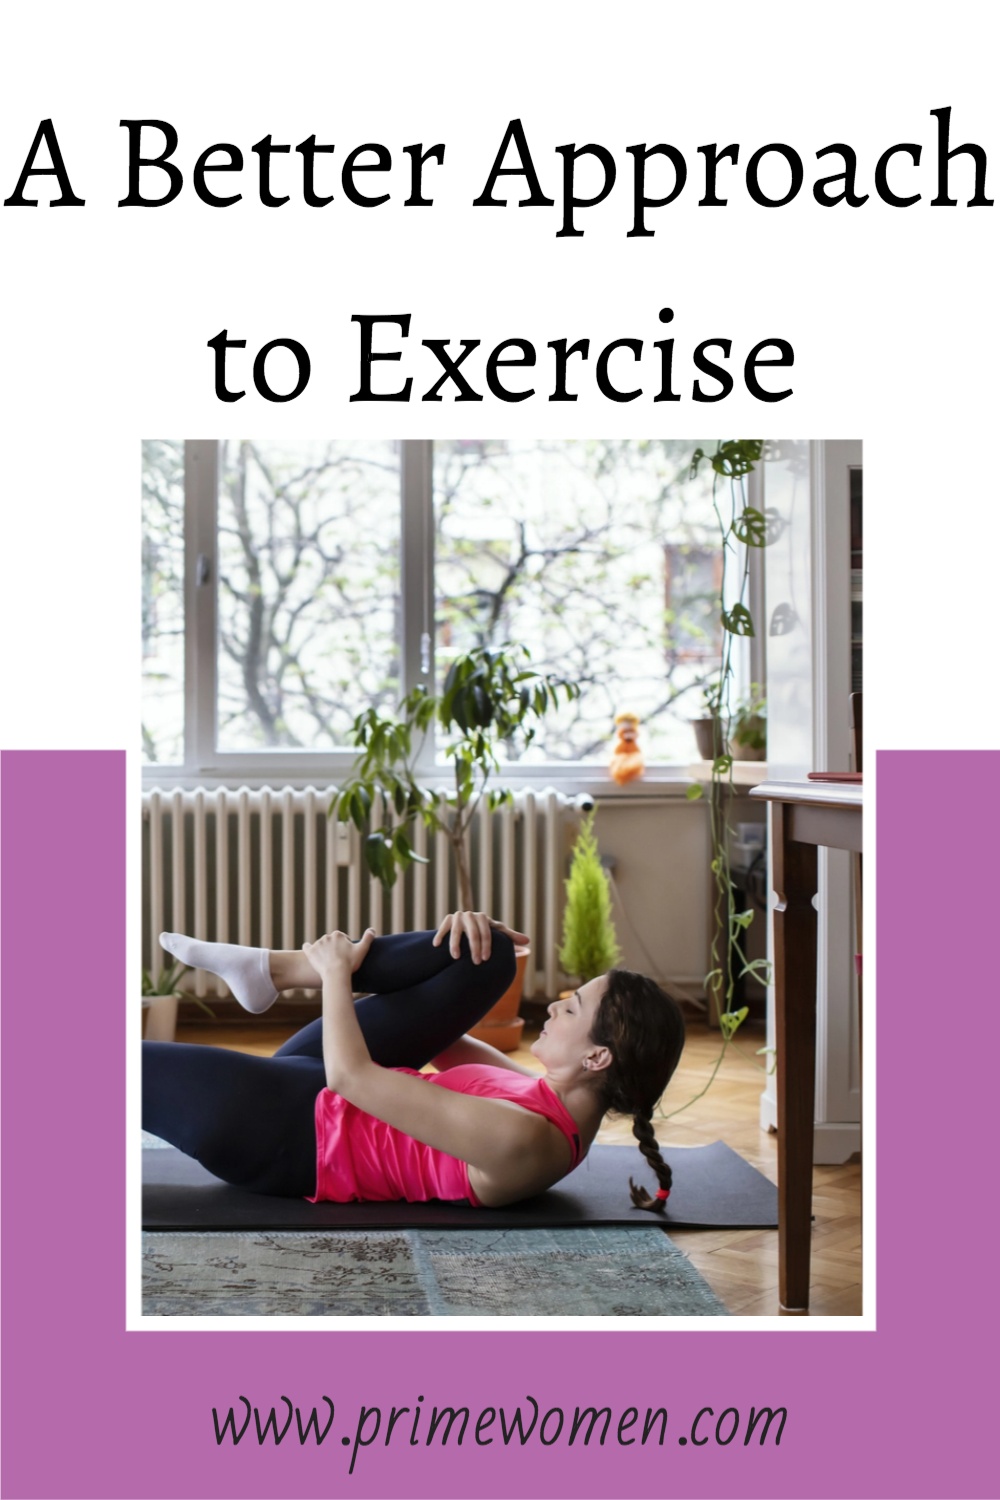 A-Better-Approach-to-Exercise